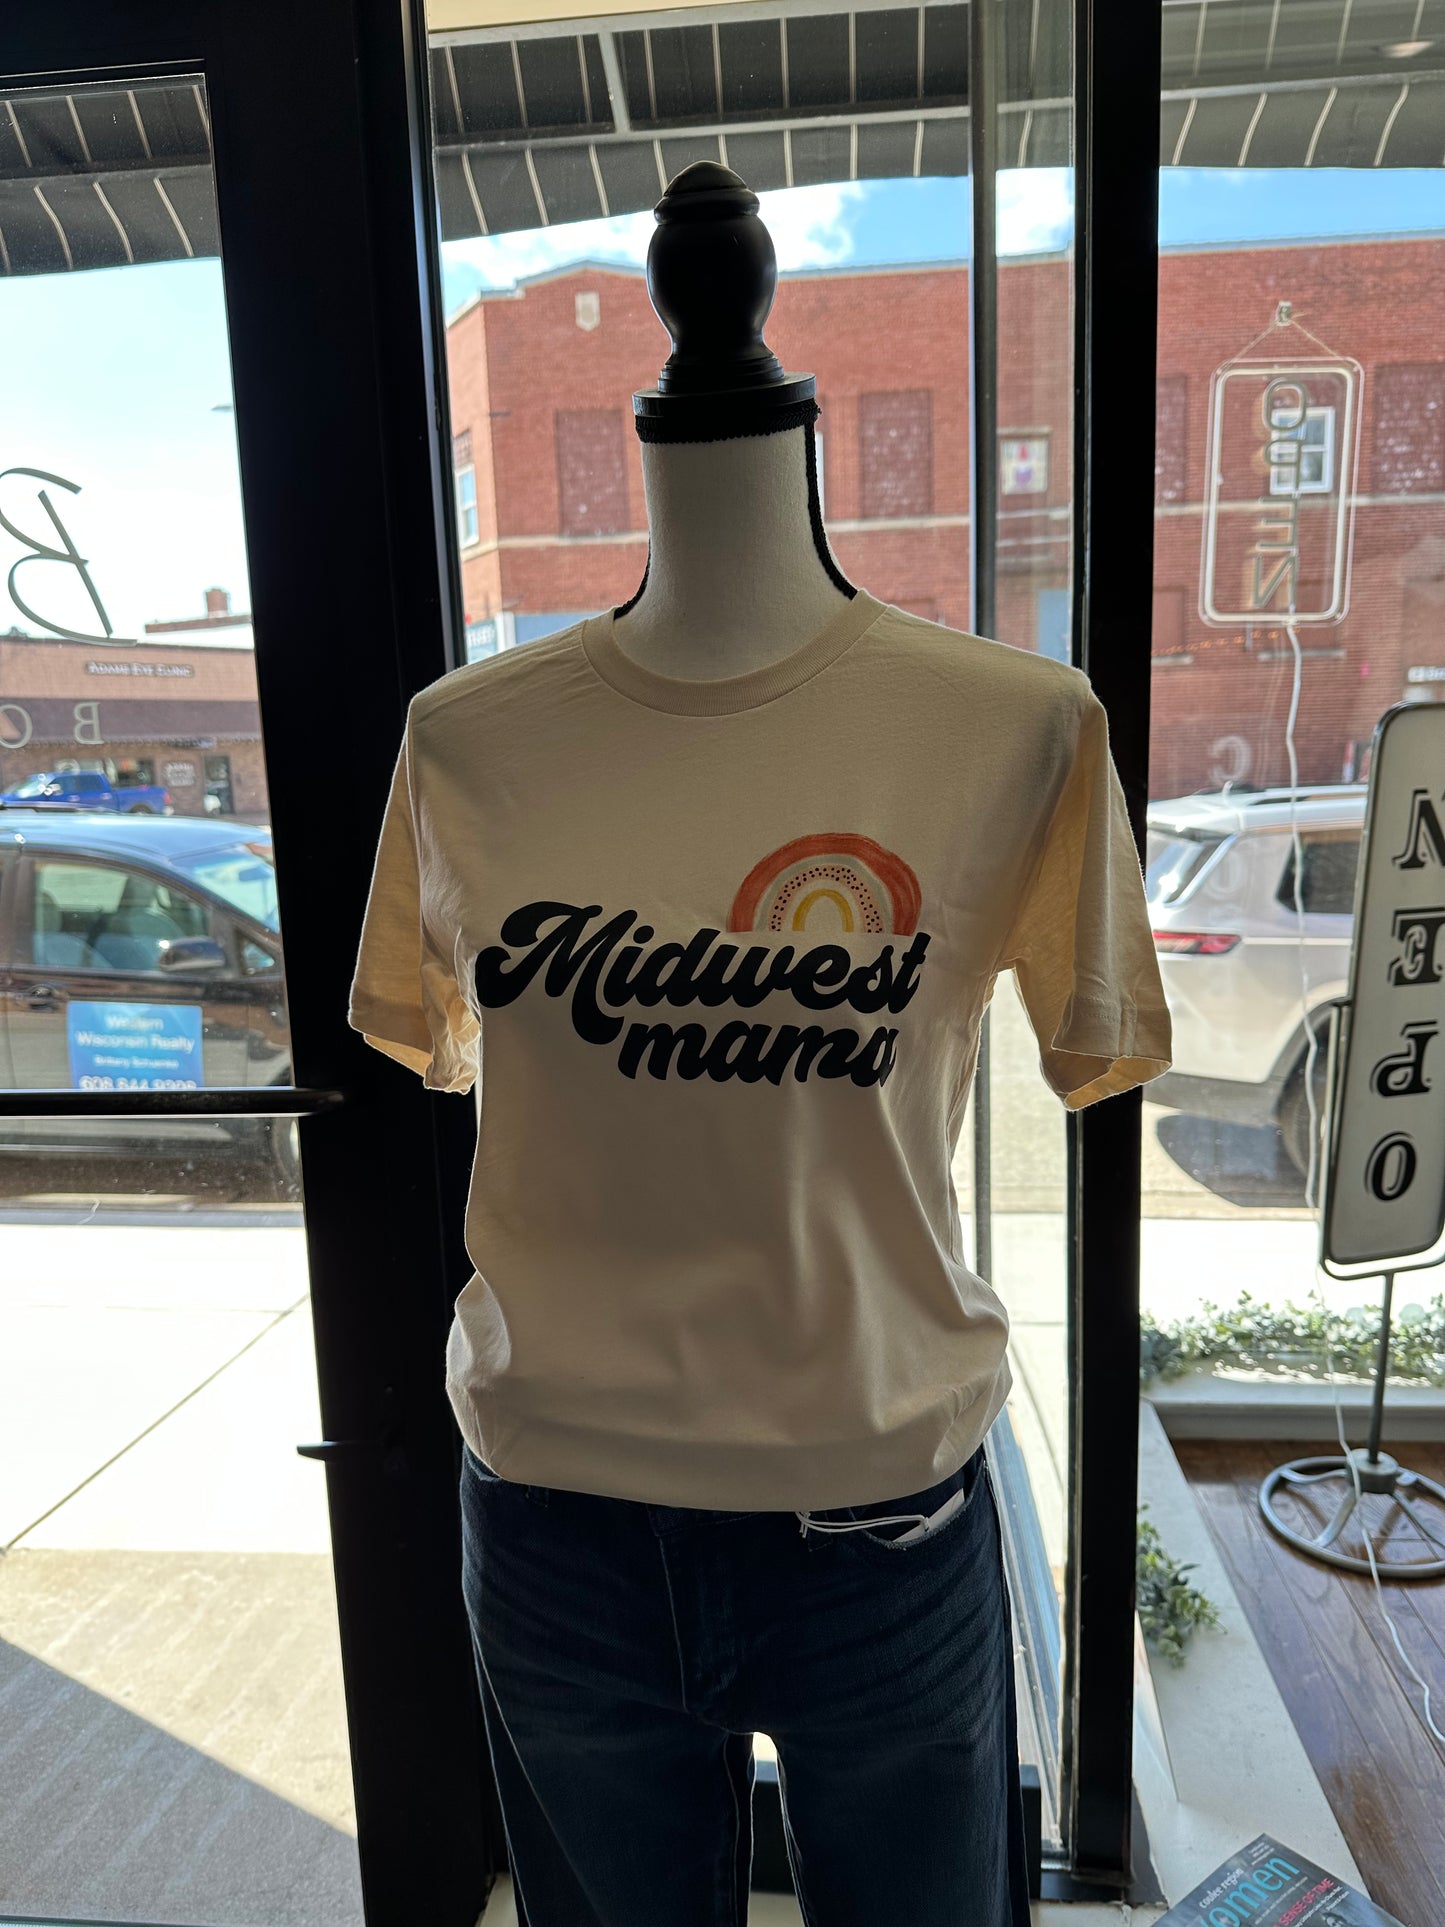 Midwest Mama tee